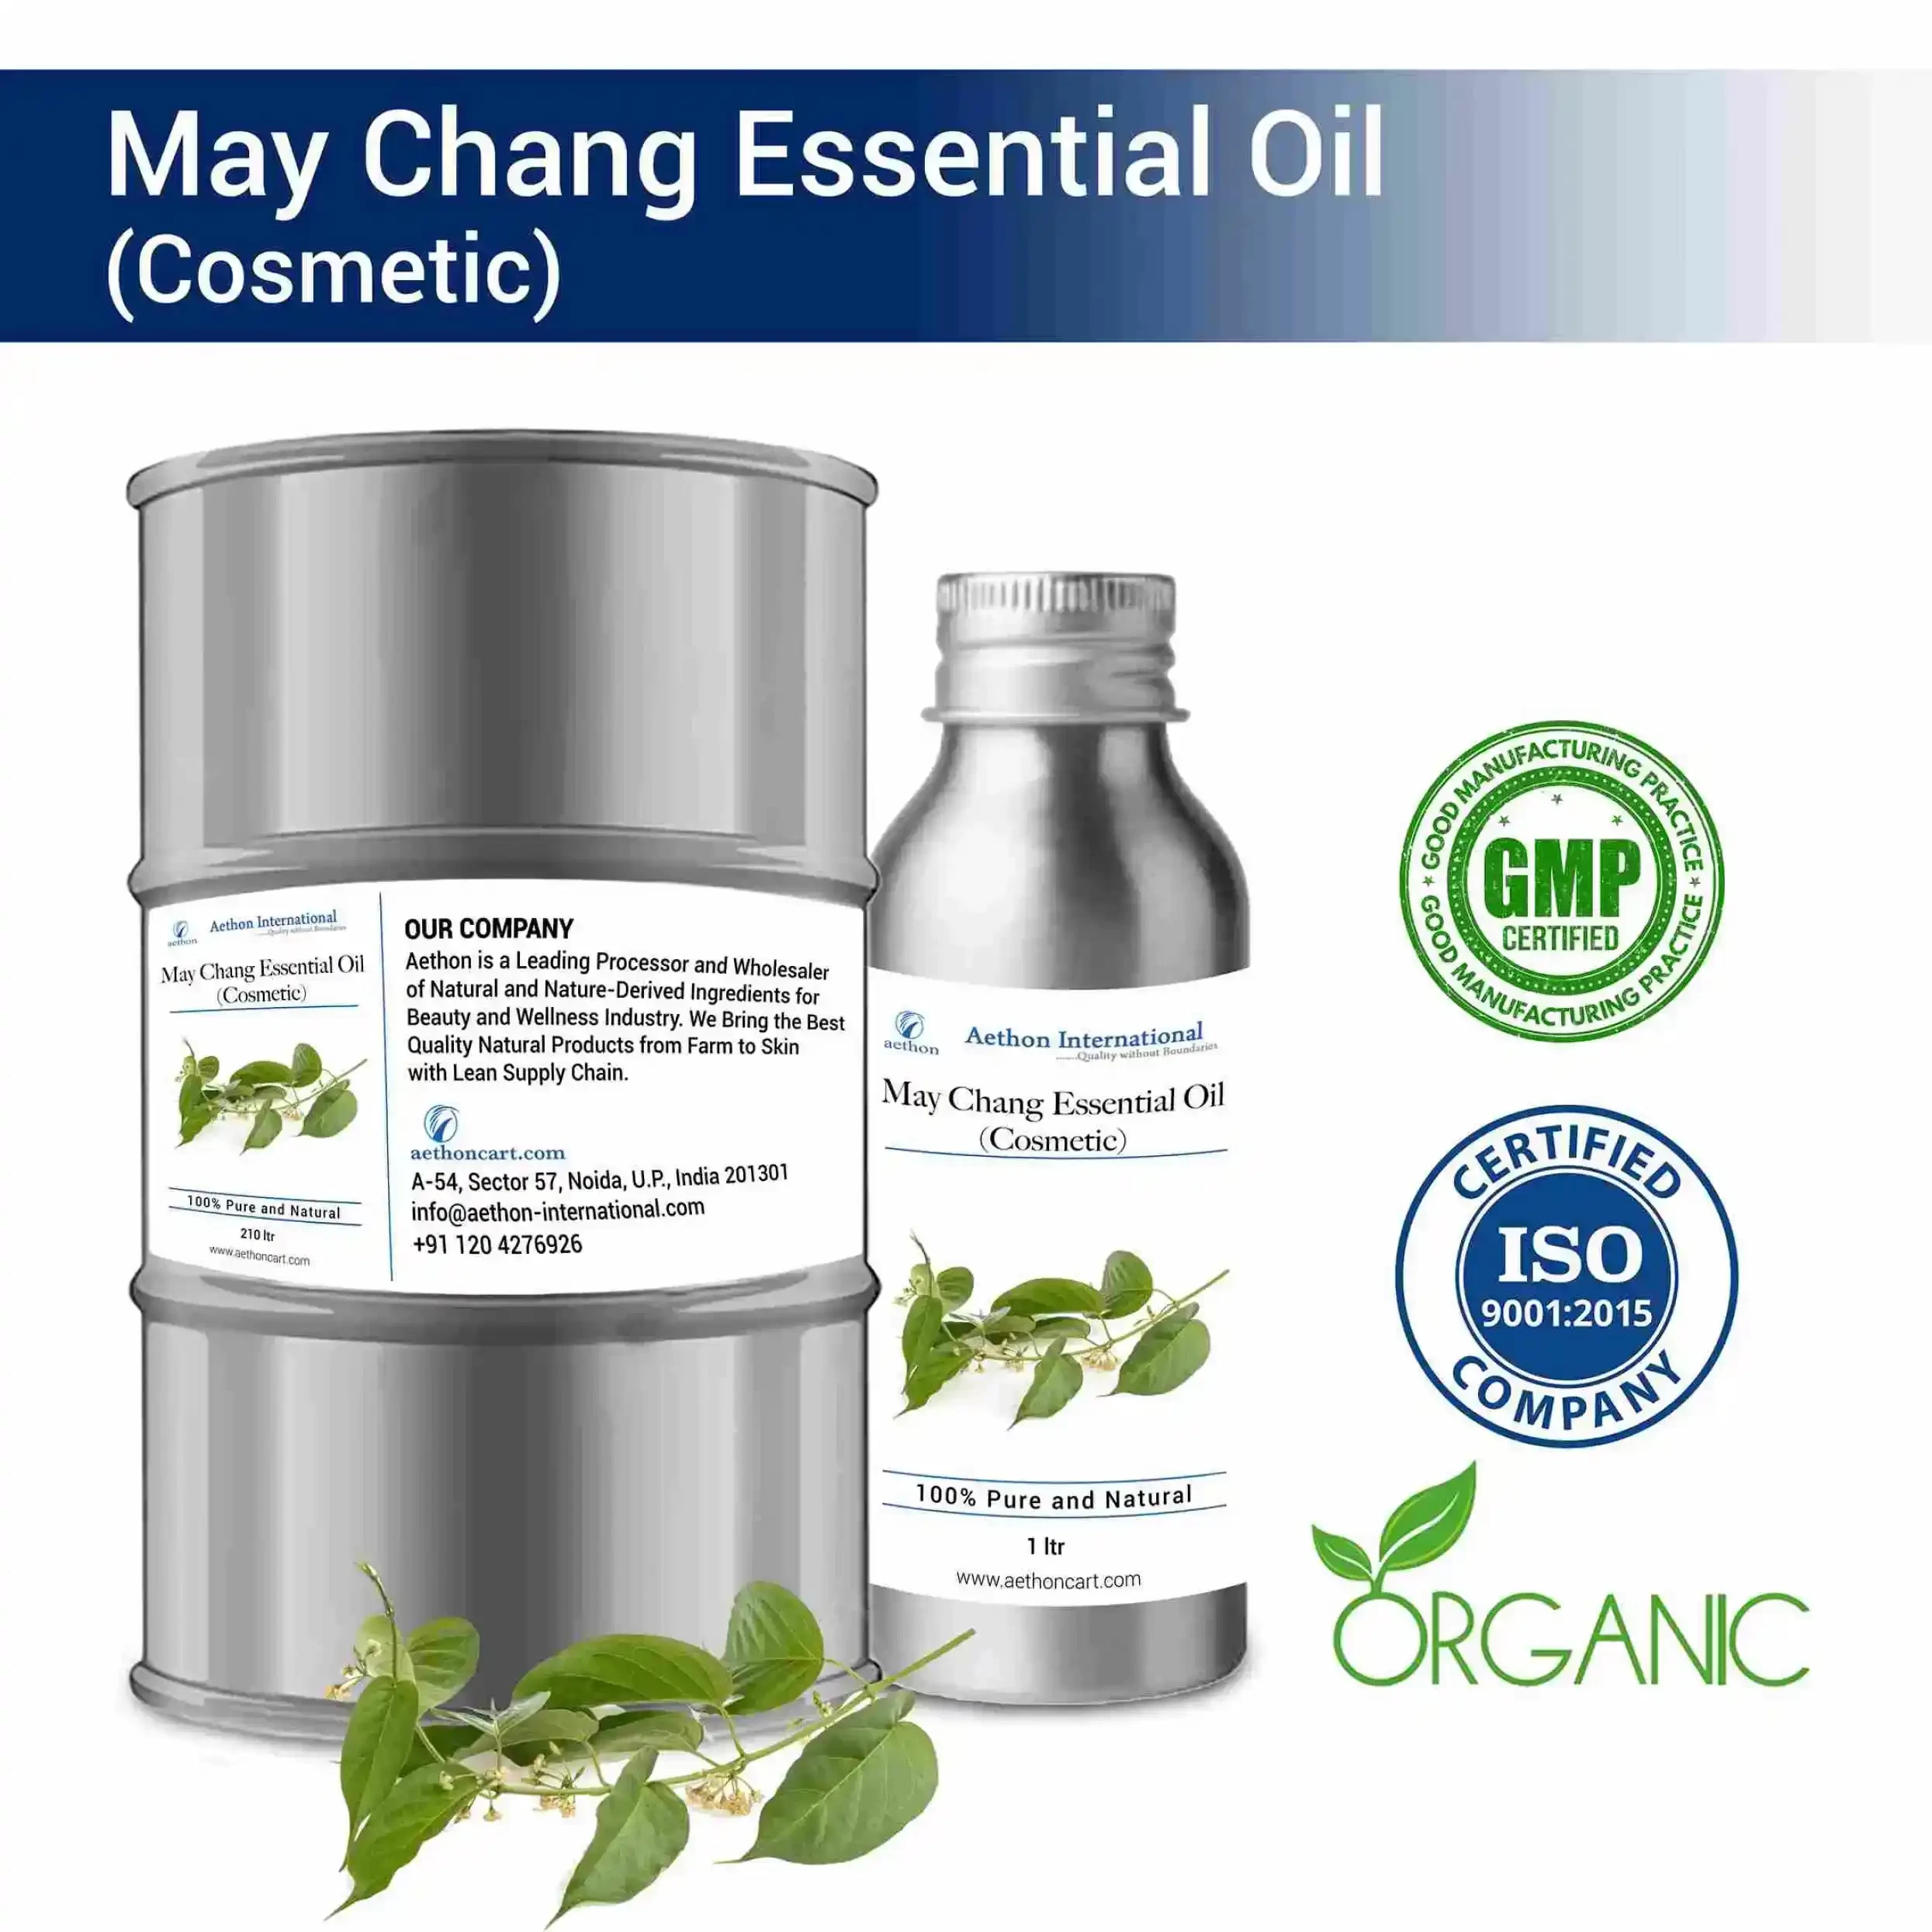 May Chang Essential Oil (Cosmetic)